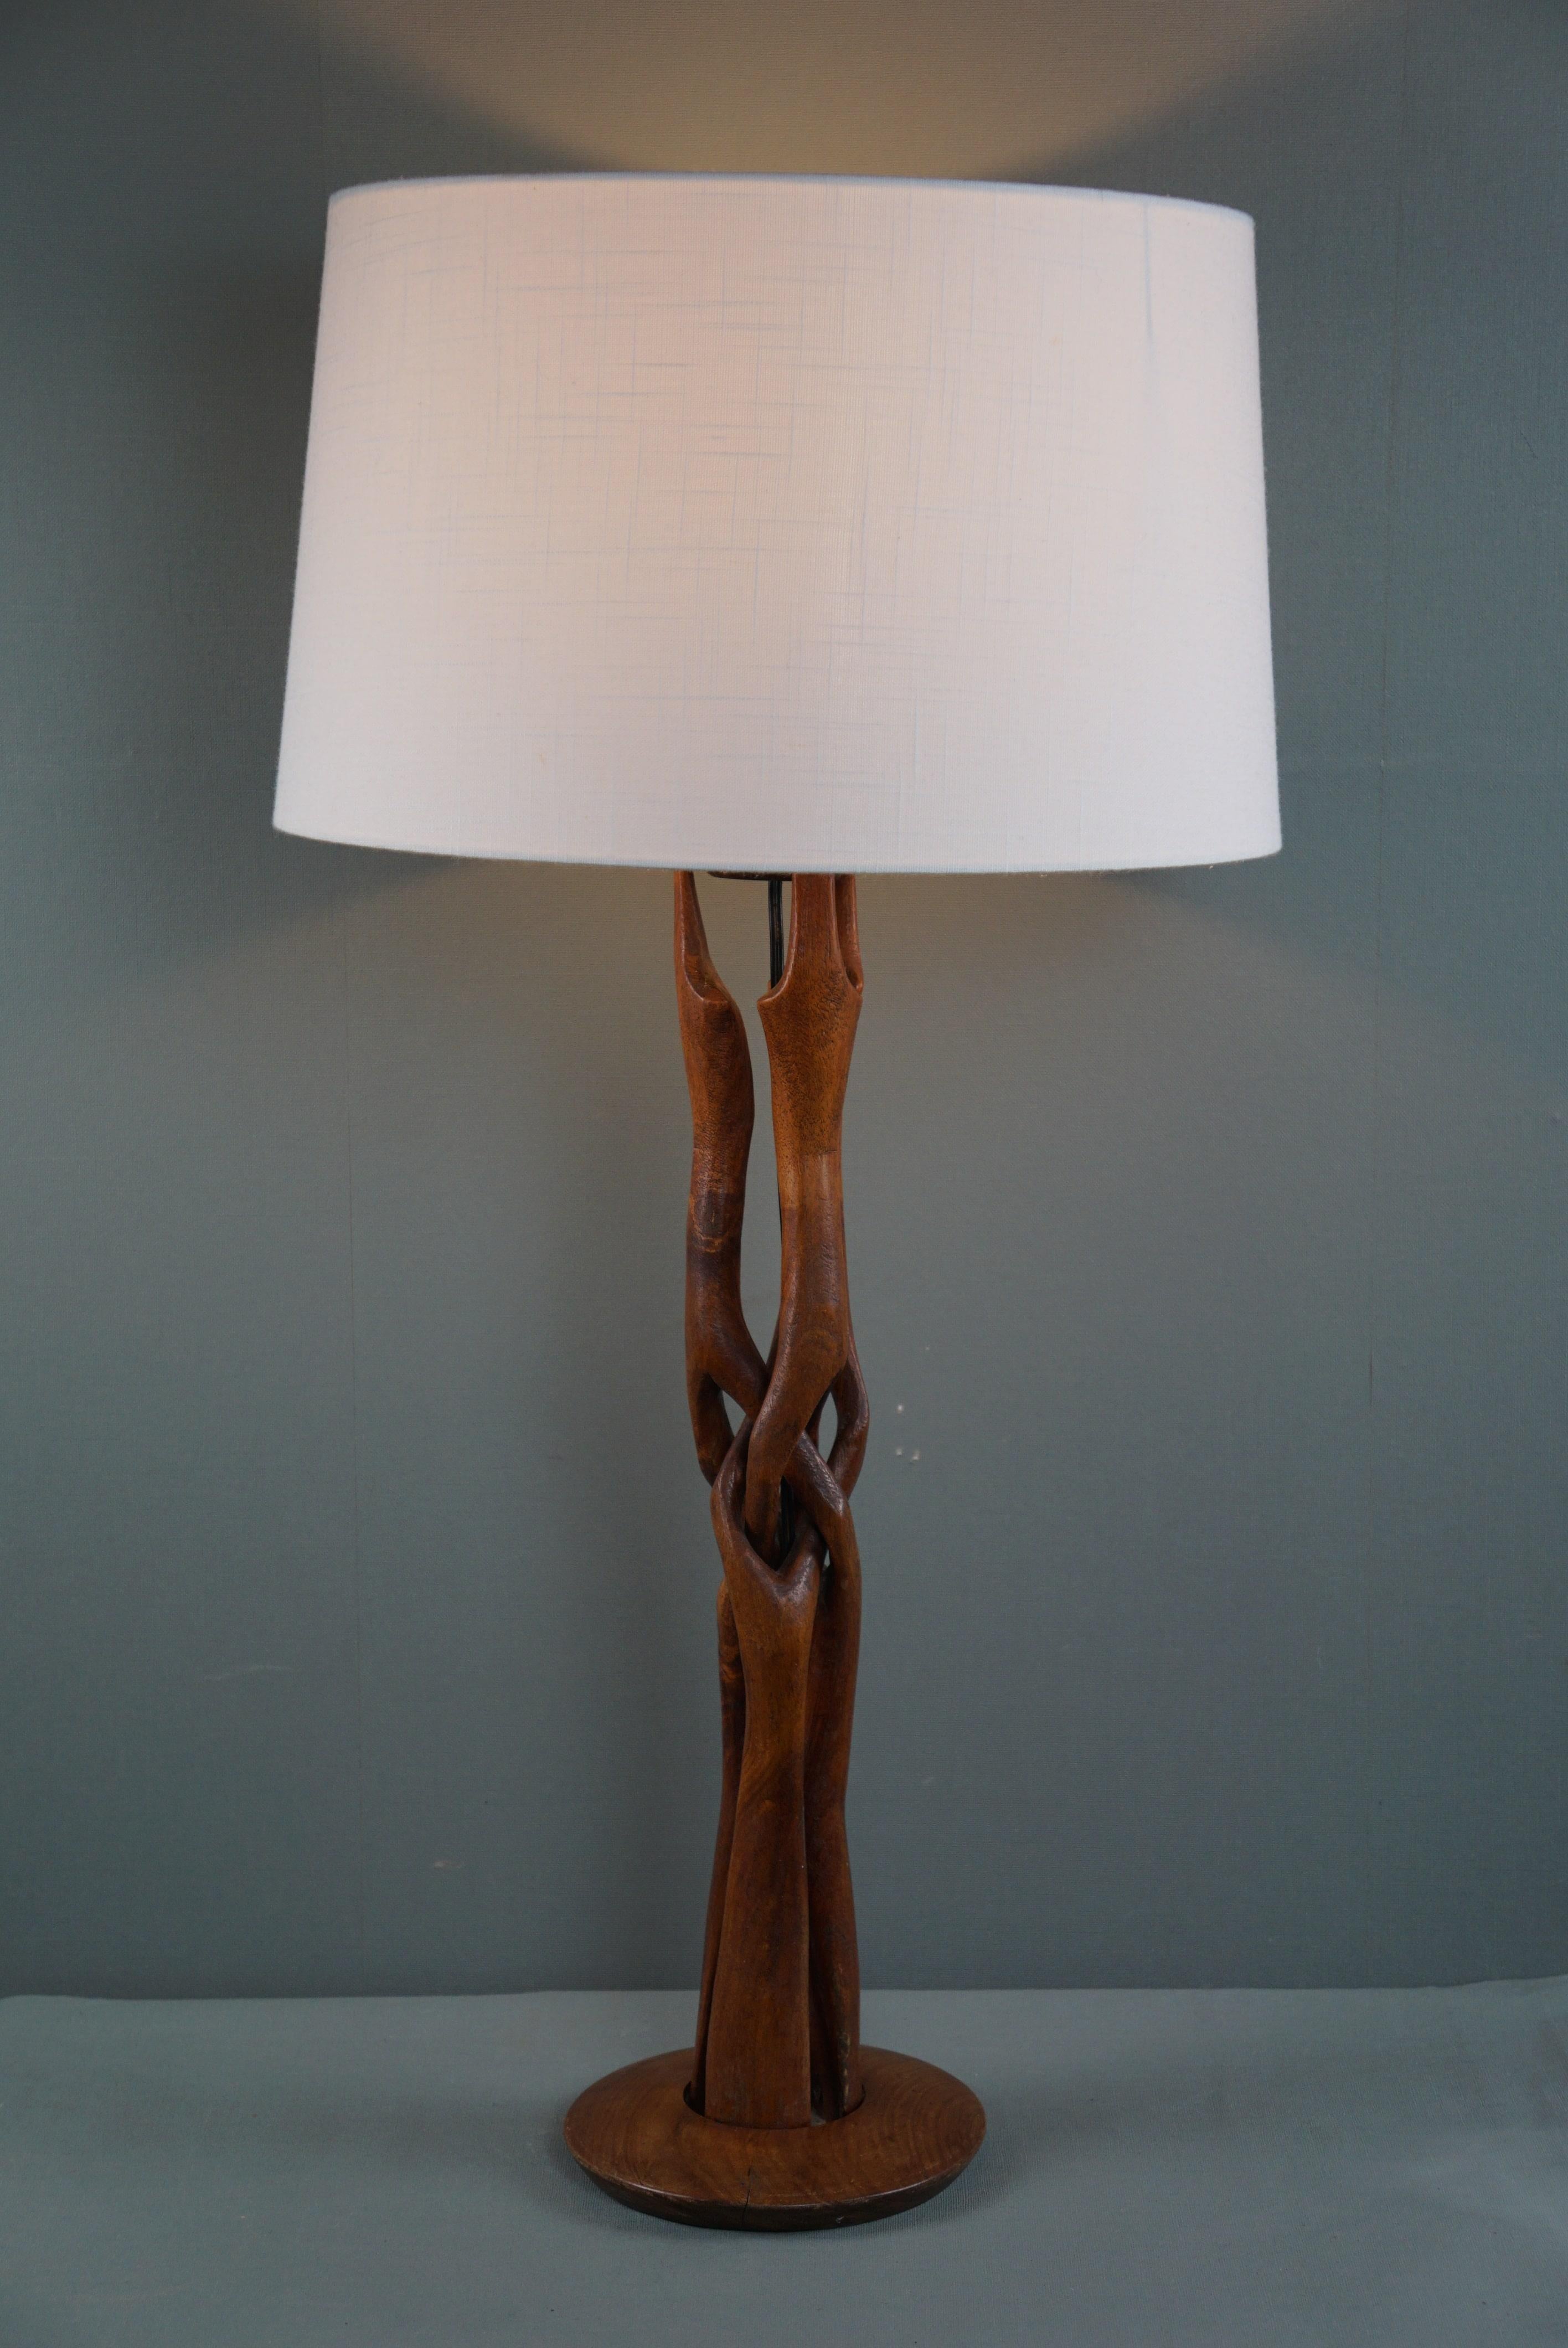 Offered is this impressive wooden design lamp from the 1960s with an amazingly designed base.

This very impressive, beautiful carved wooden table lamp has a playful but contemporary look due to its organically shaped base and white shade. The